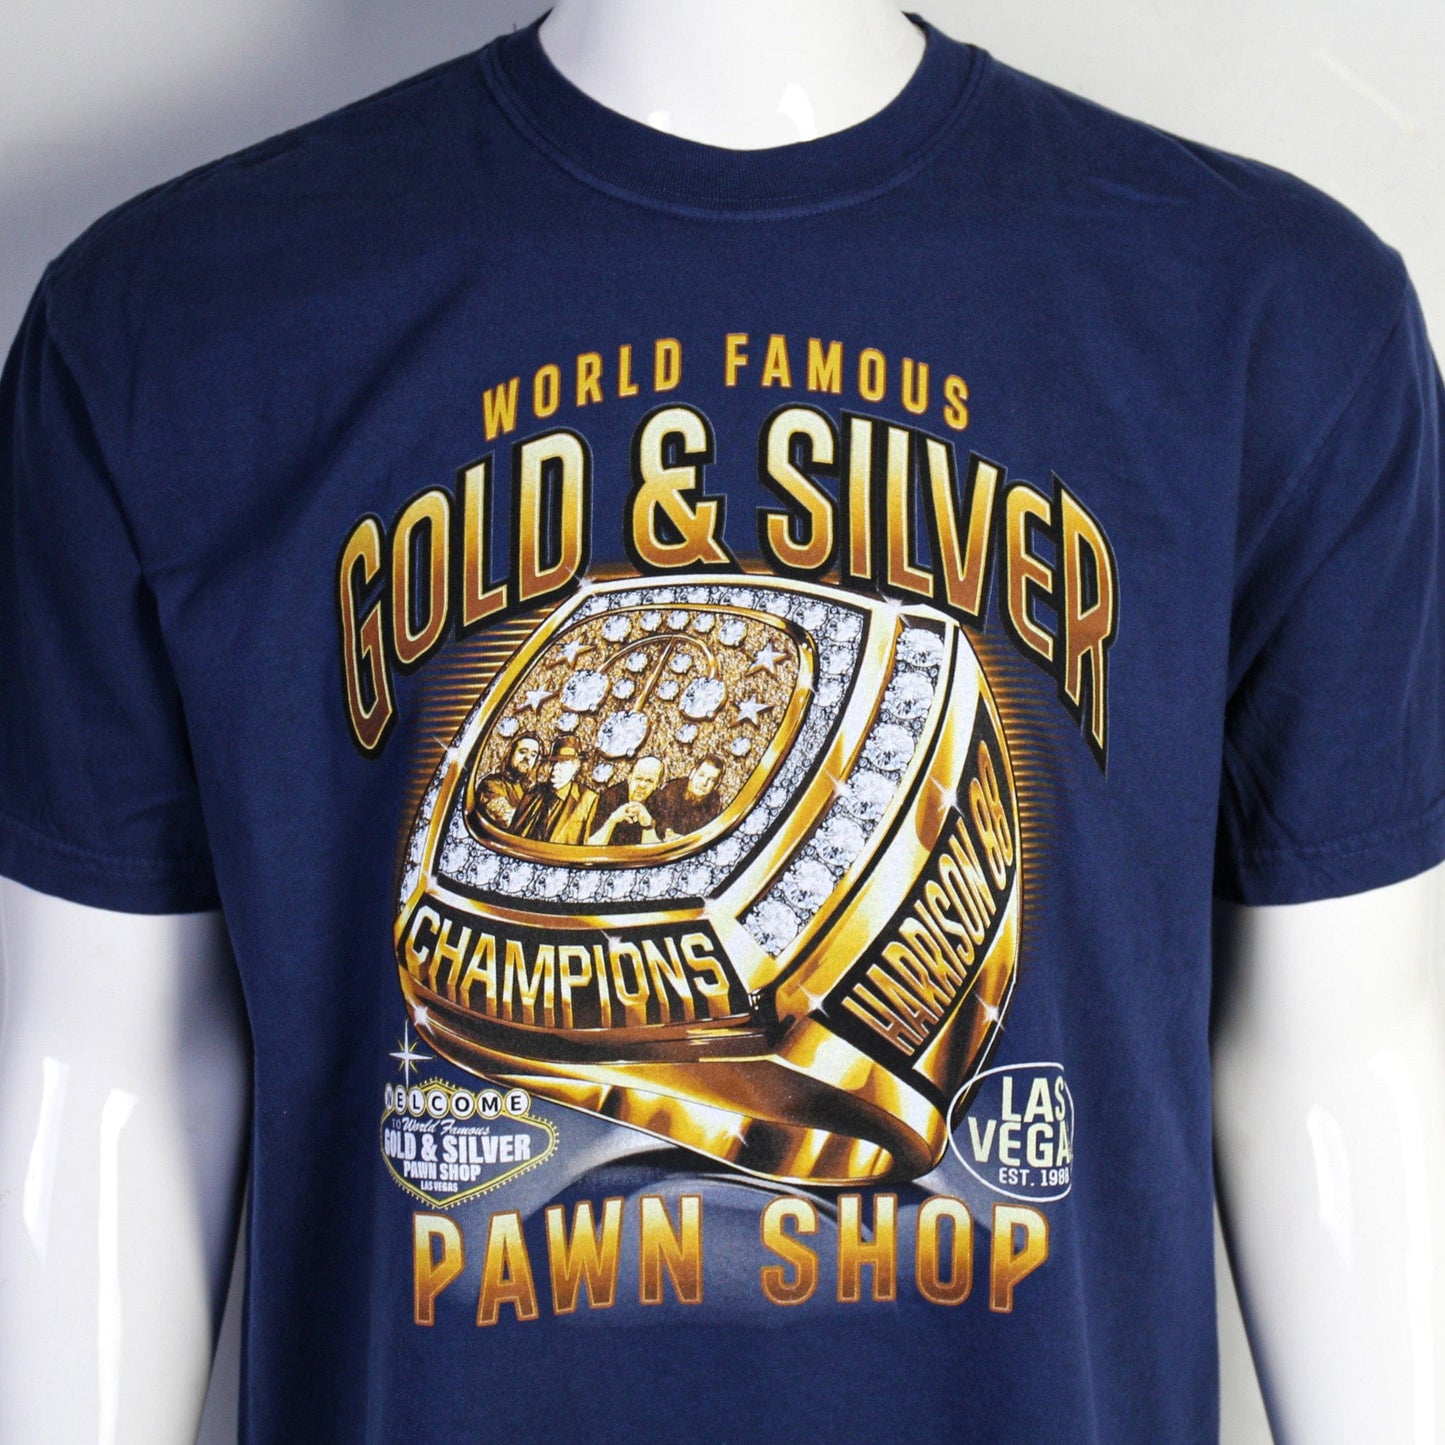 World Famous Gold & Silver Pawn Shop Championship Ring T-Shirt  DetailsWorld Famous Gold & Silver Pawn Shop Championship Ring T-Shirt  Graphics